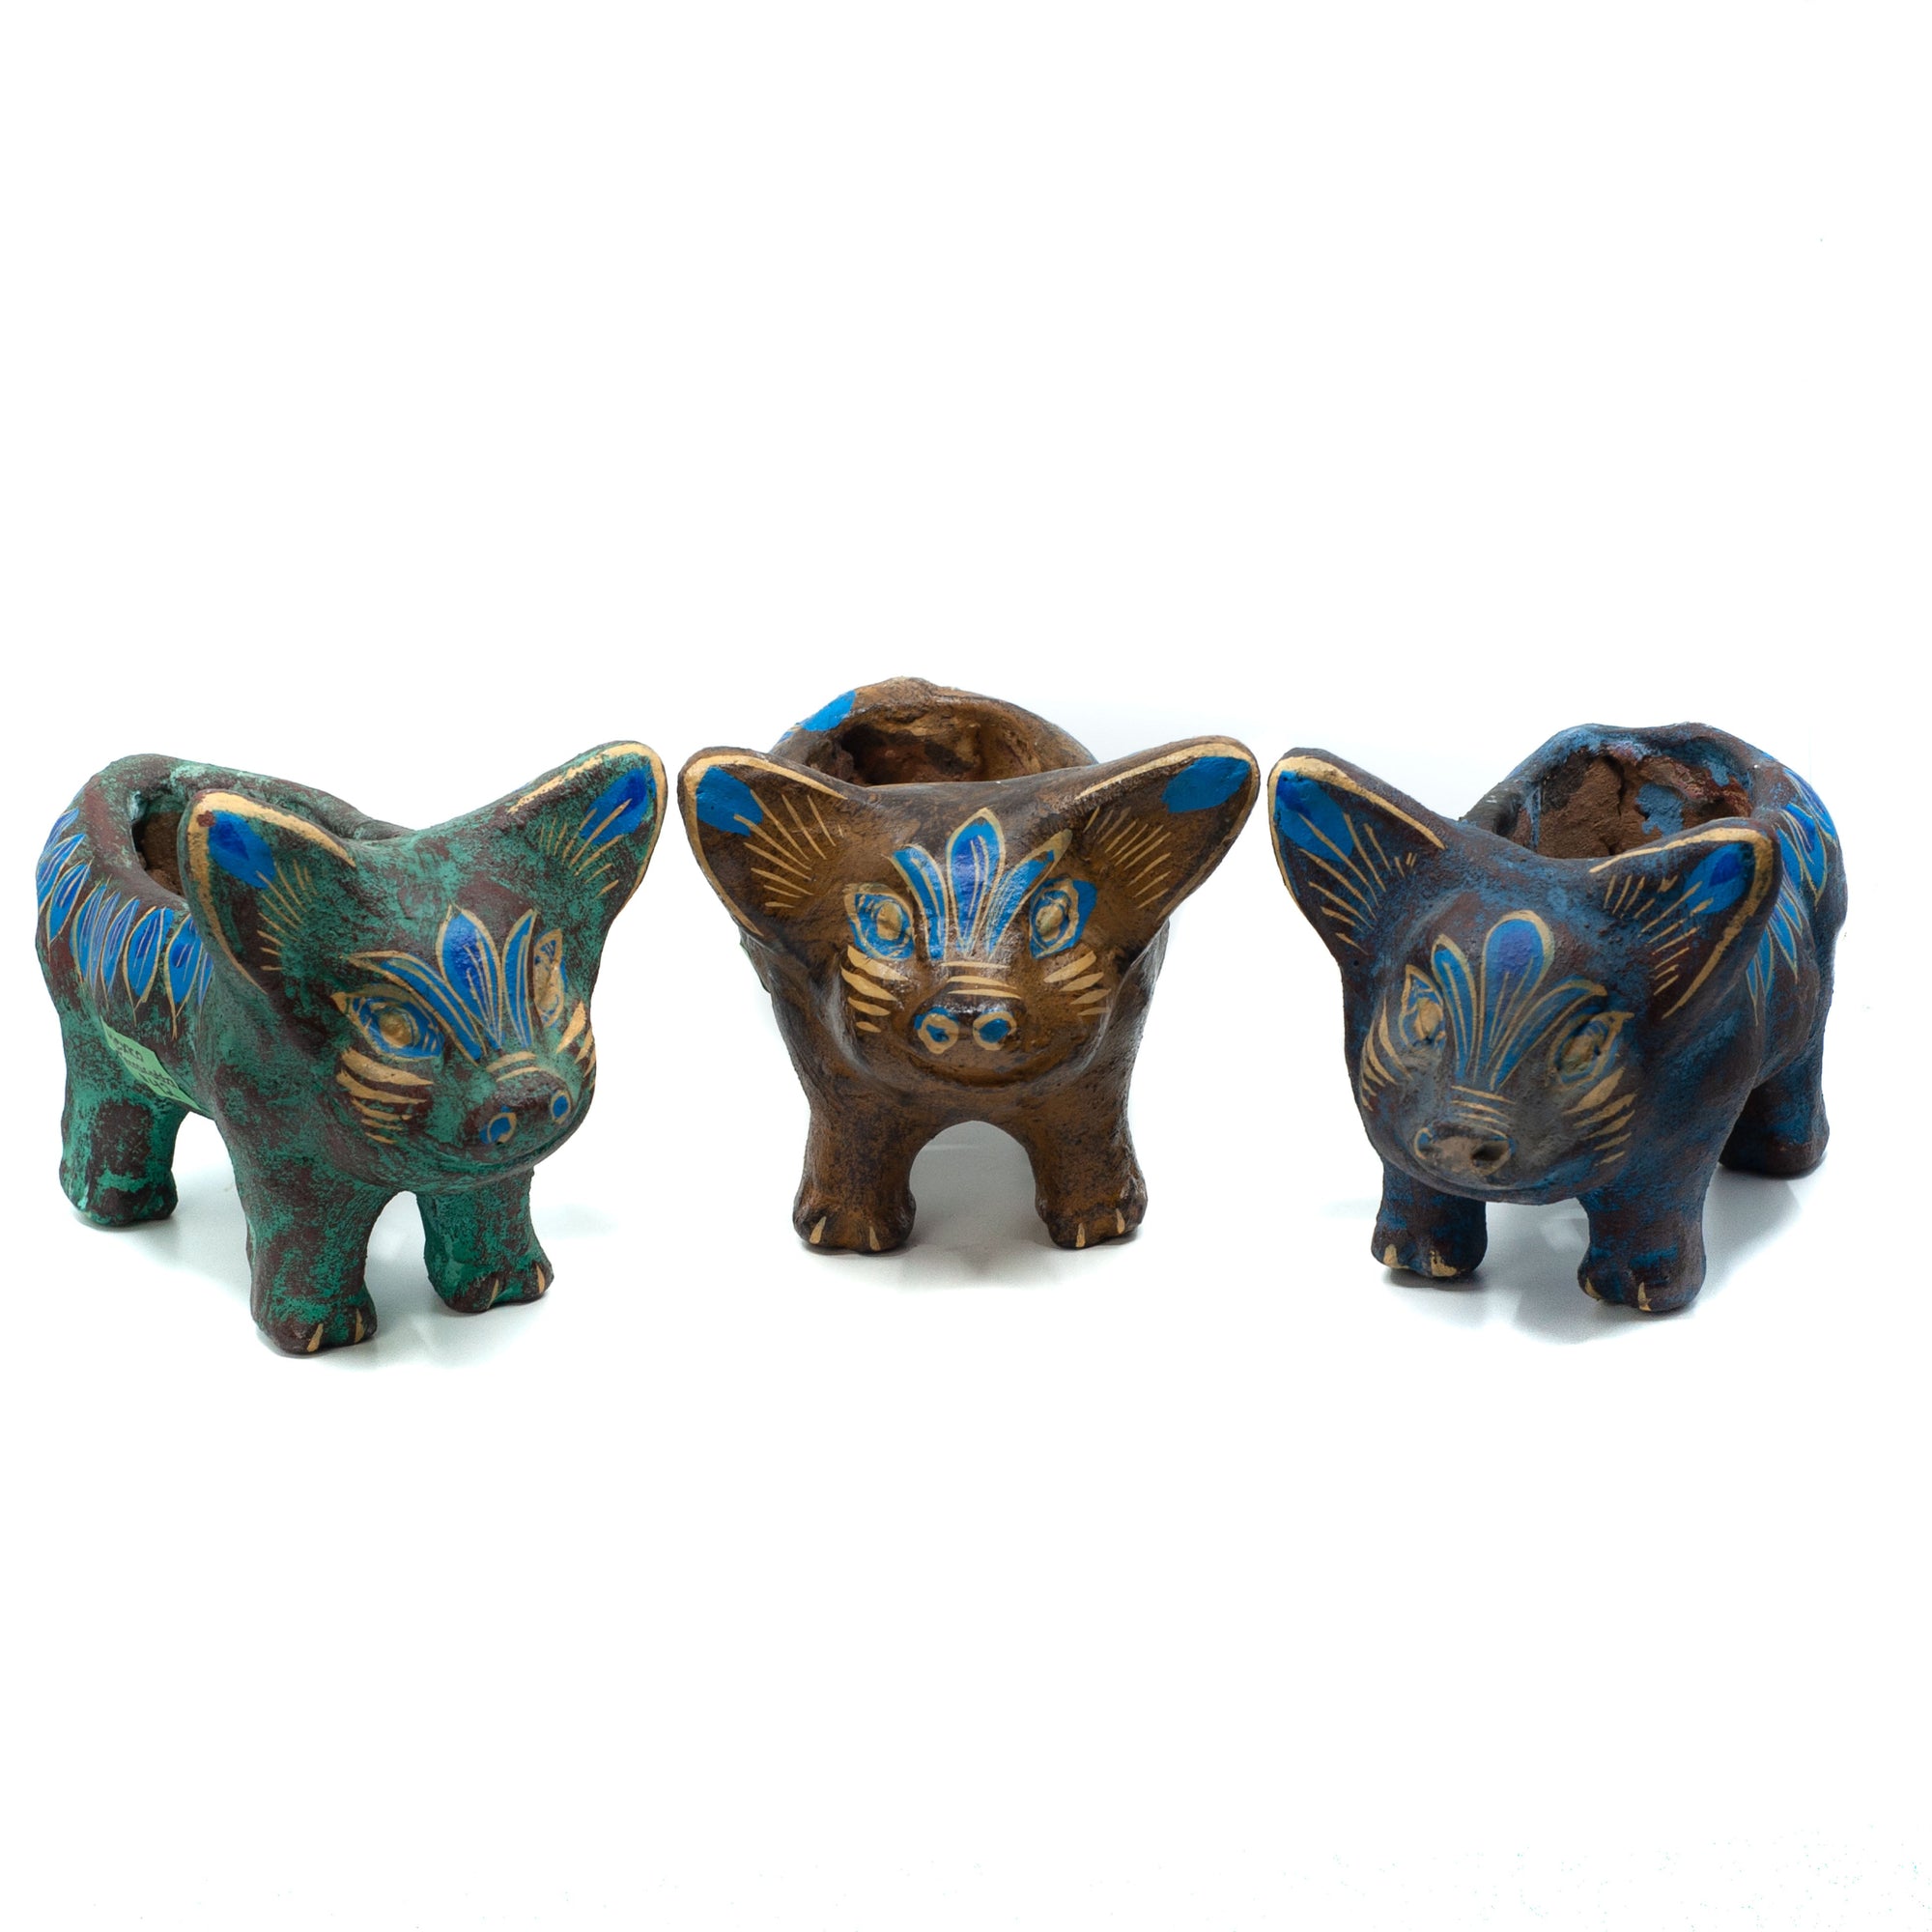 Photo of small terracotta pig plant holder with hand-painted designs